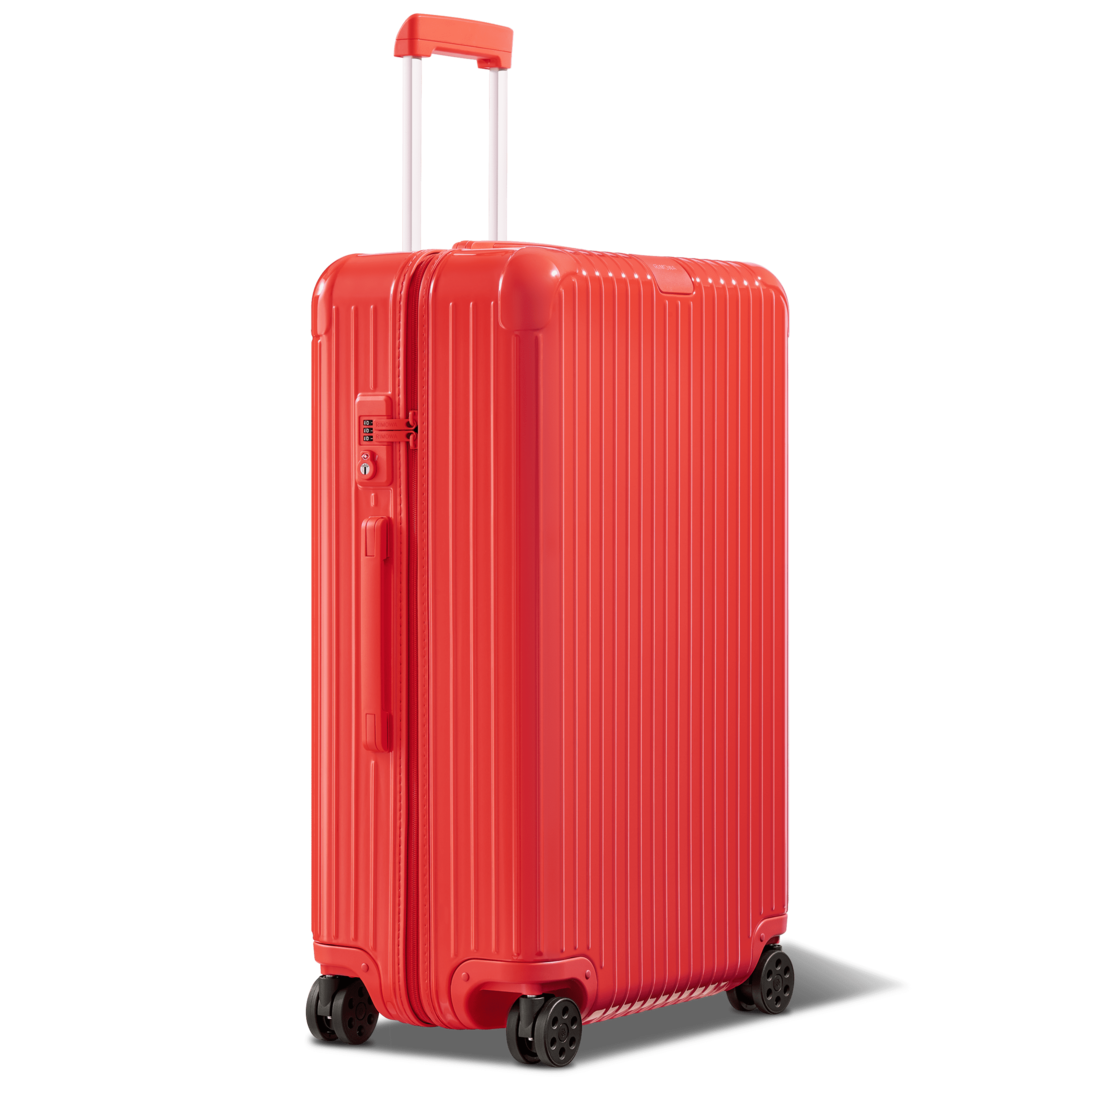 Essential Check-In L Lightweight Suitcase | Flamingo Red | RIMOWA